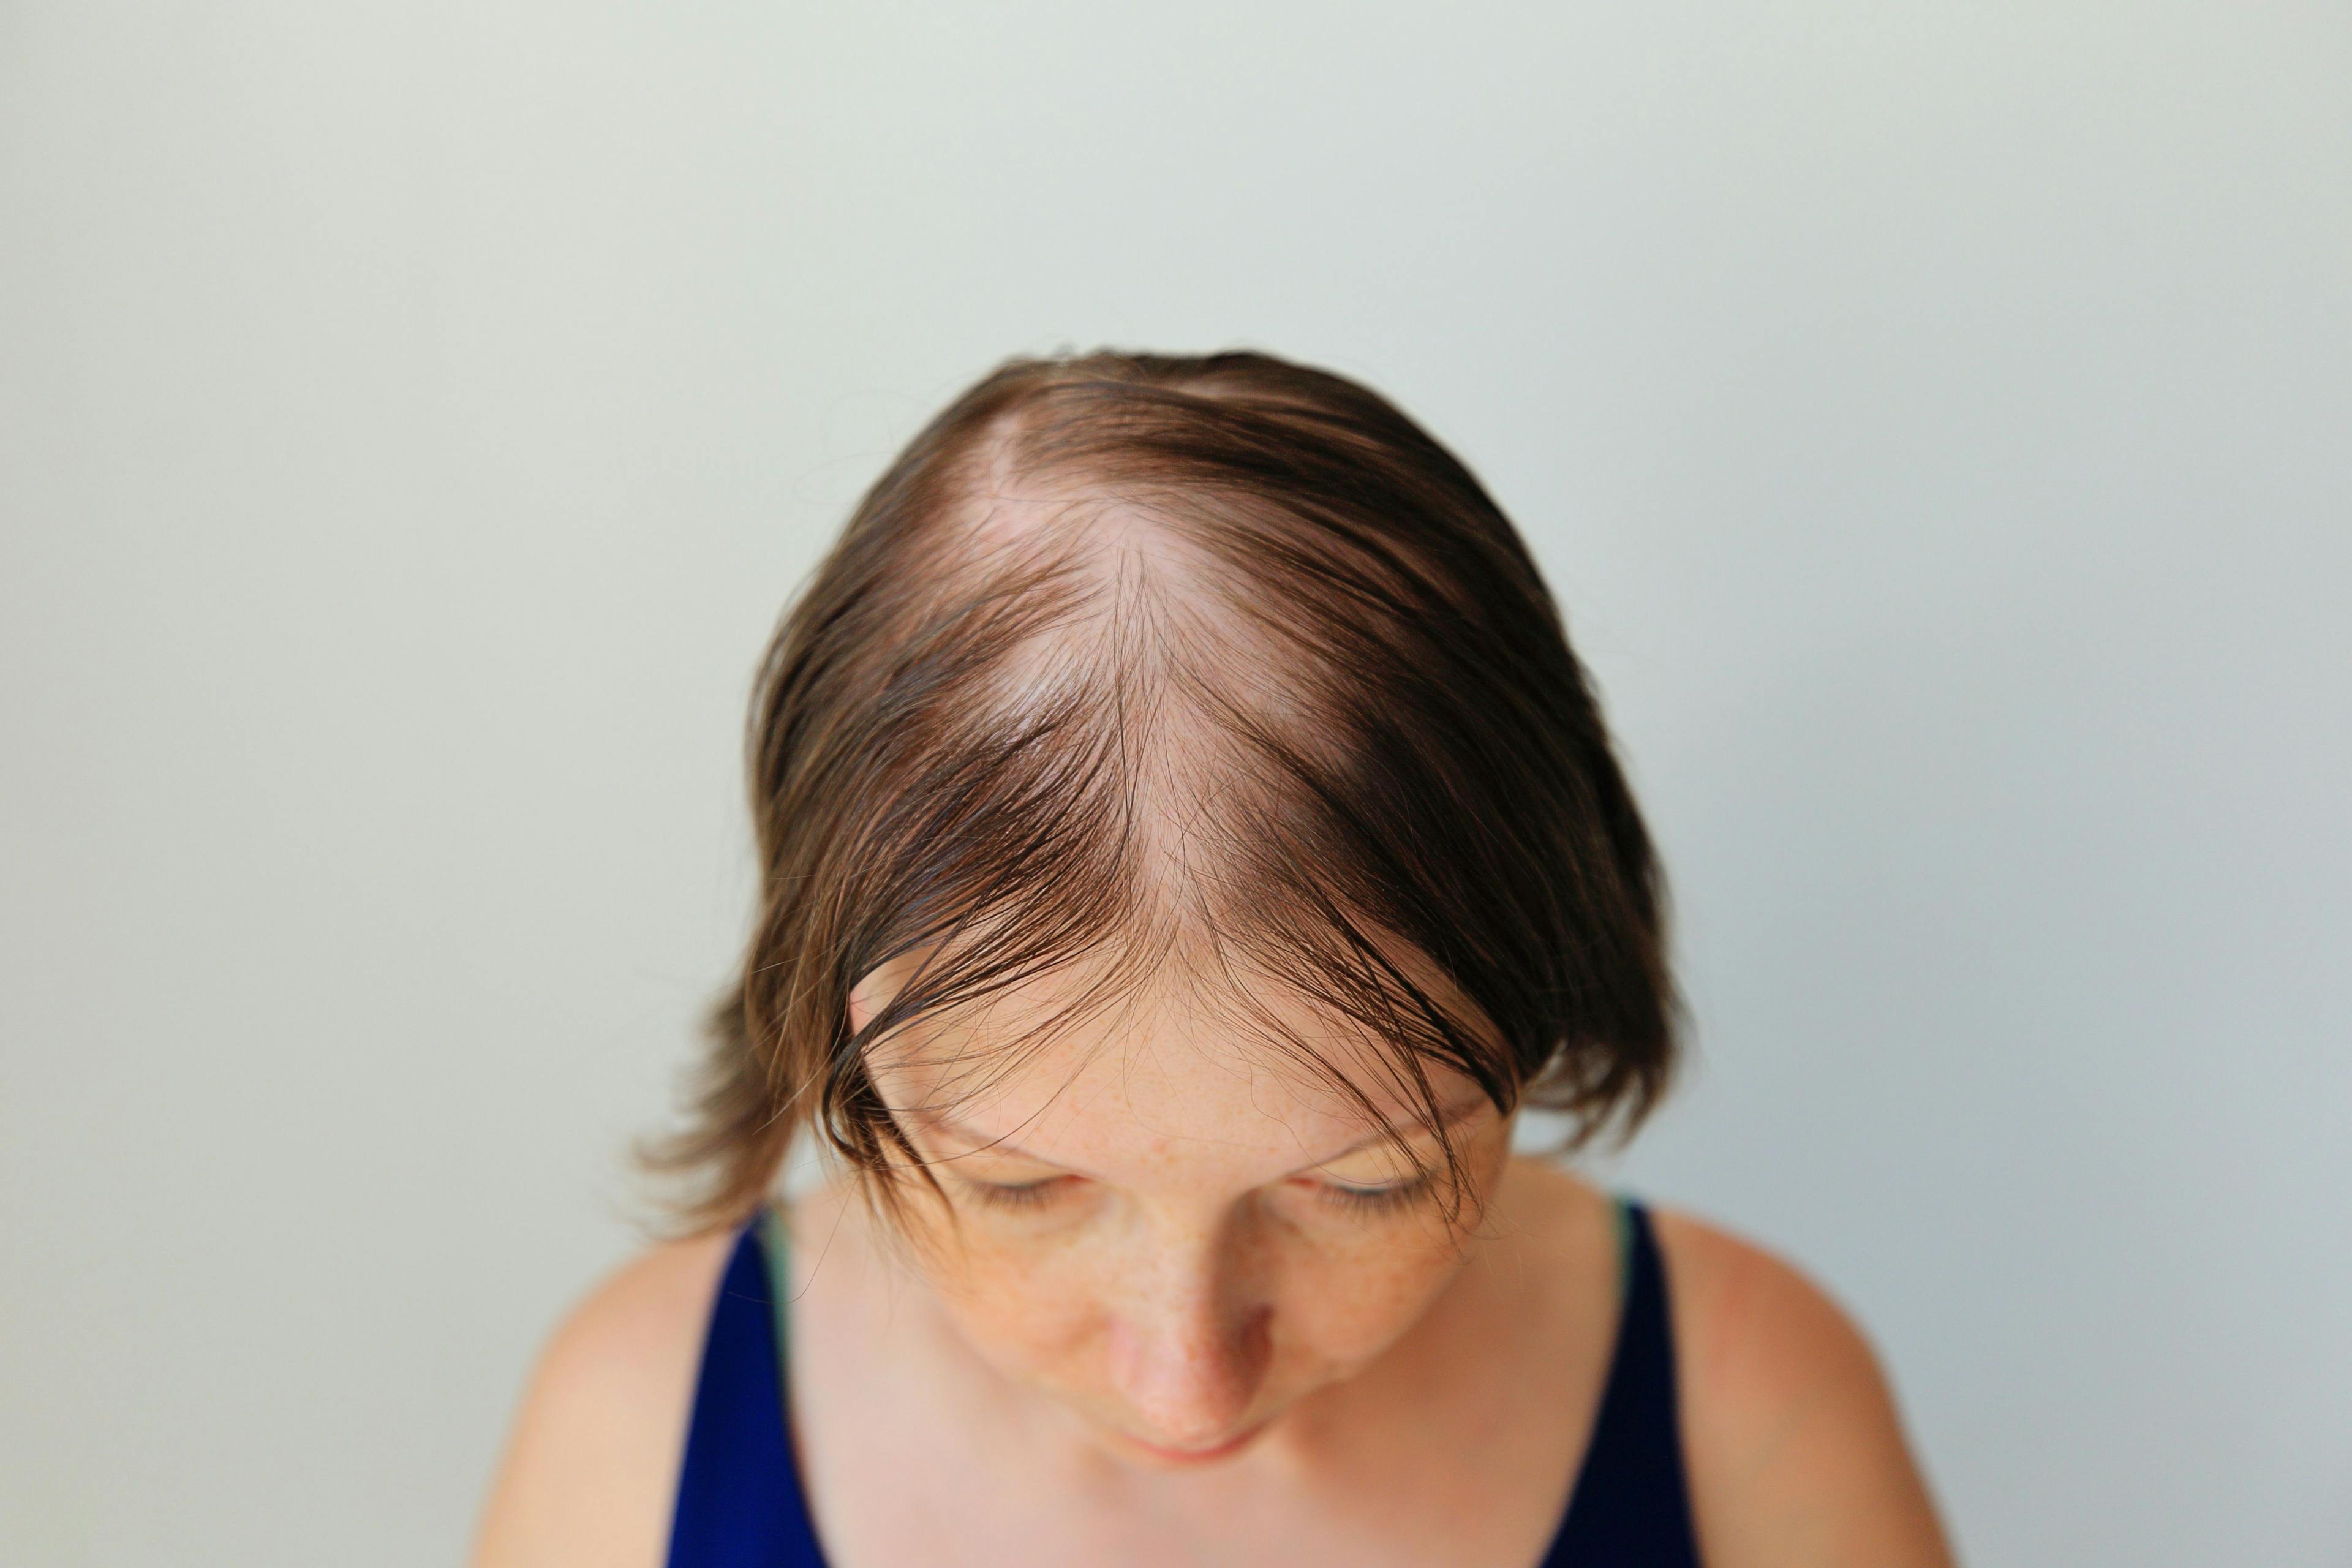 Uptitration of Baricitinib Effective in Improving Hair Growth in Patients With Alopecia Areata